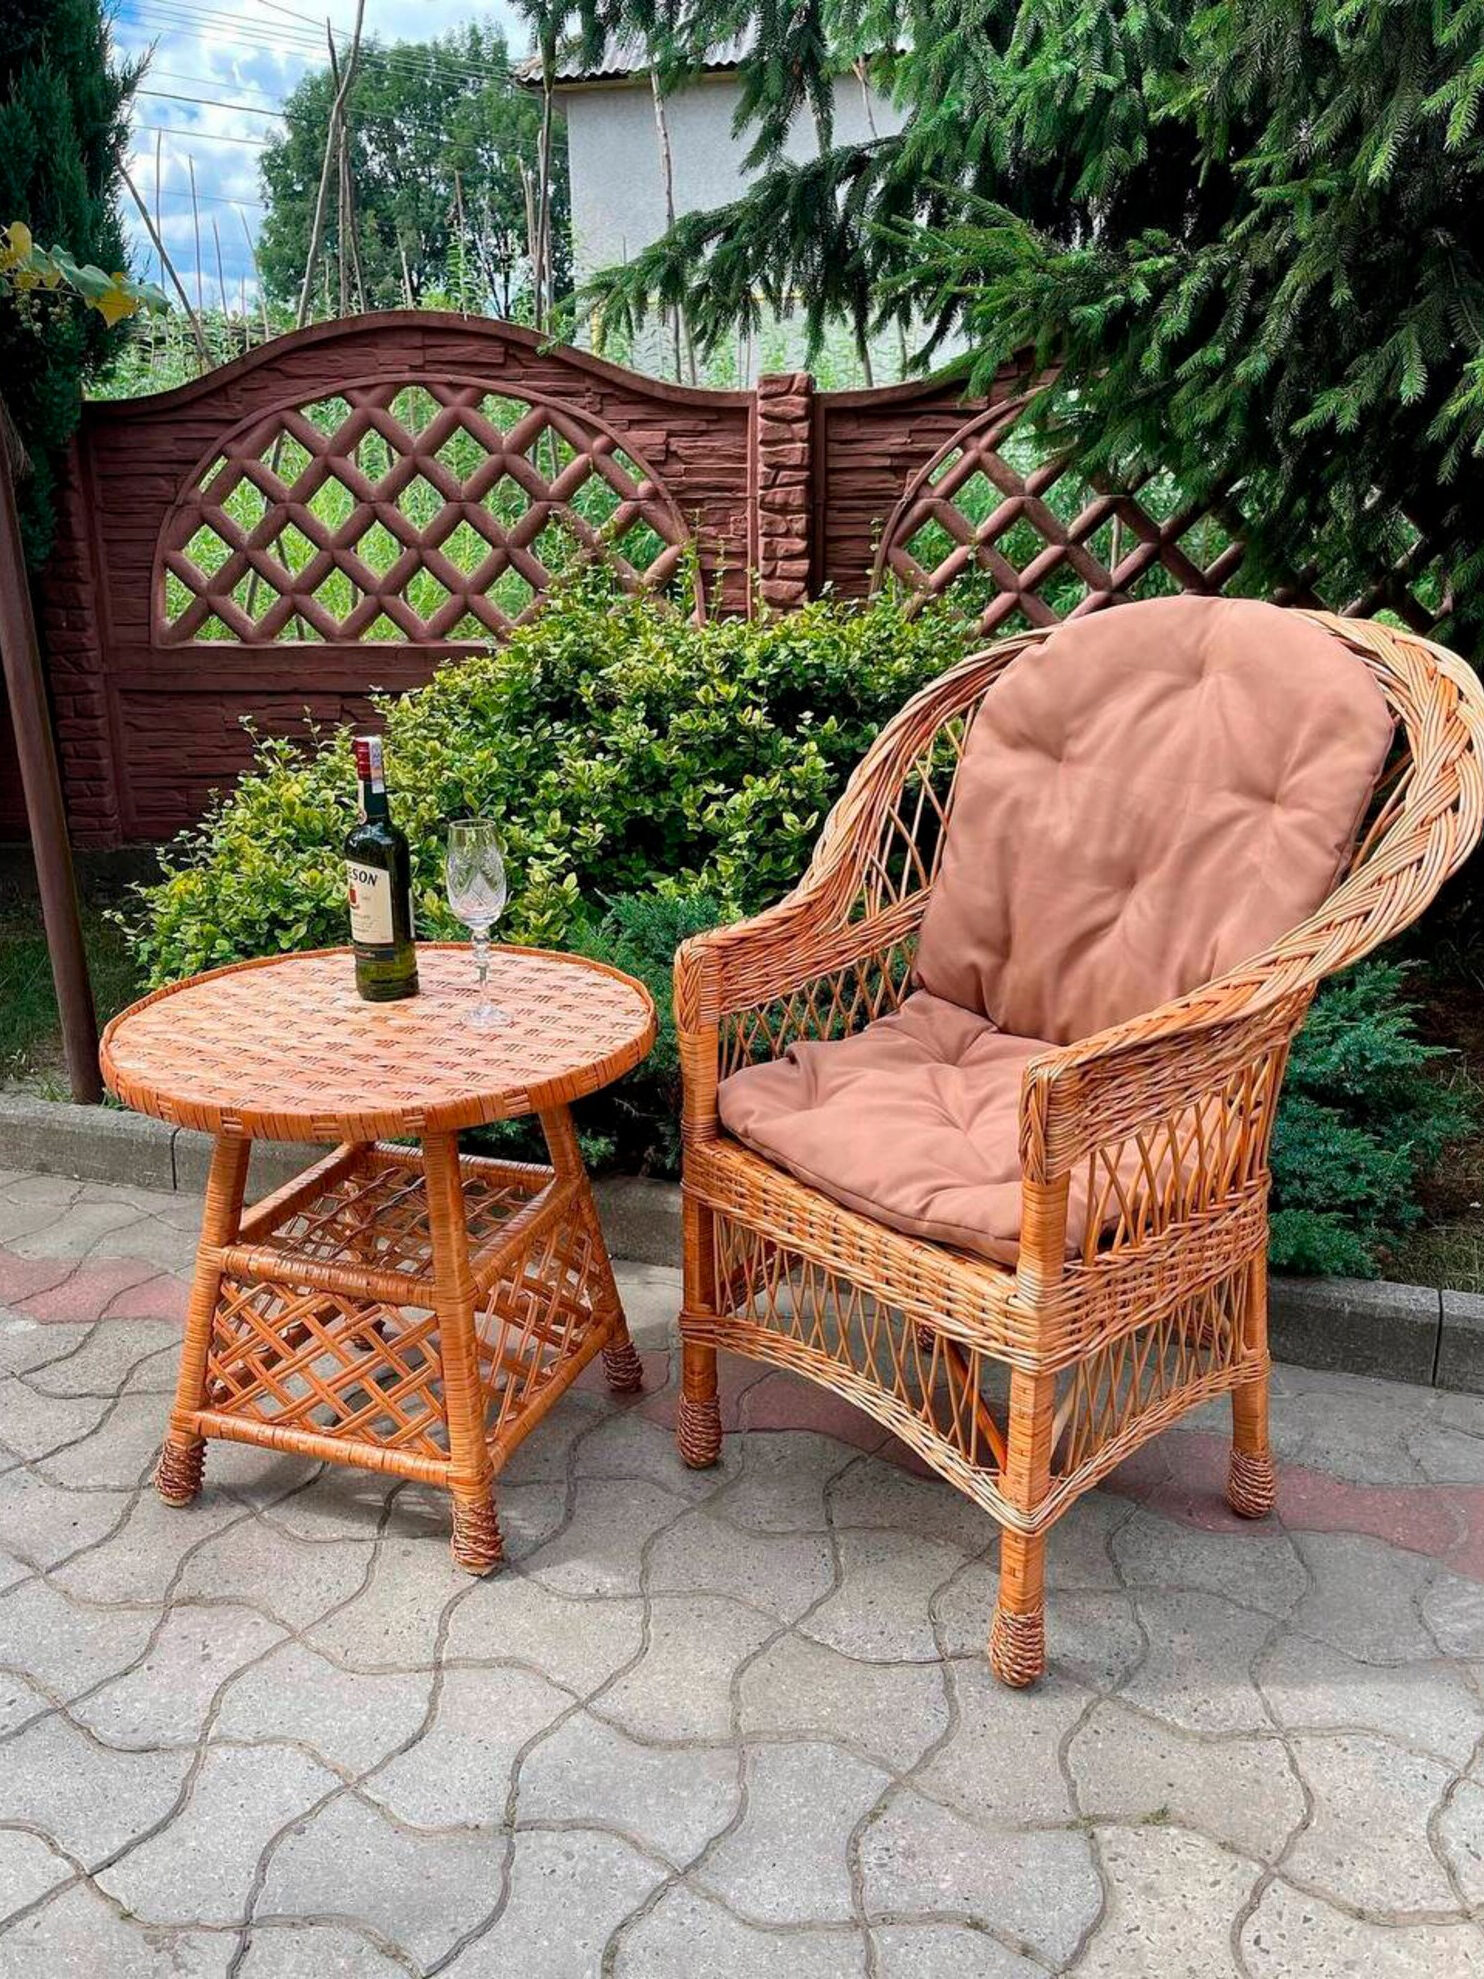 A wicker chair and table with a bottle of wine.